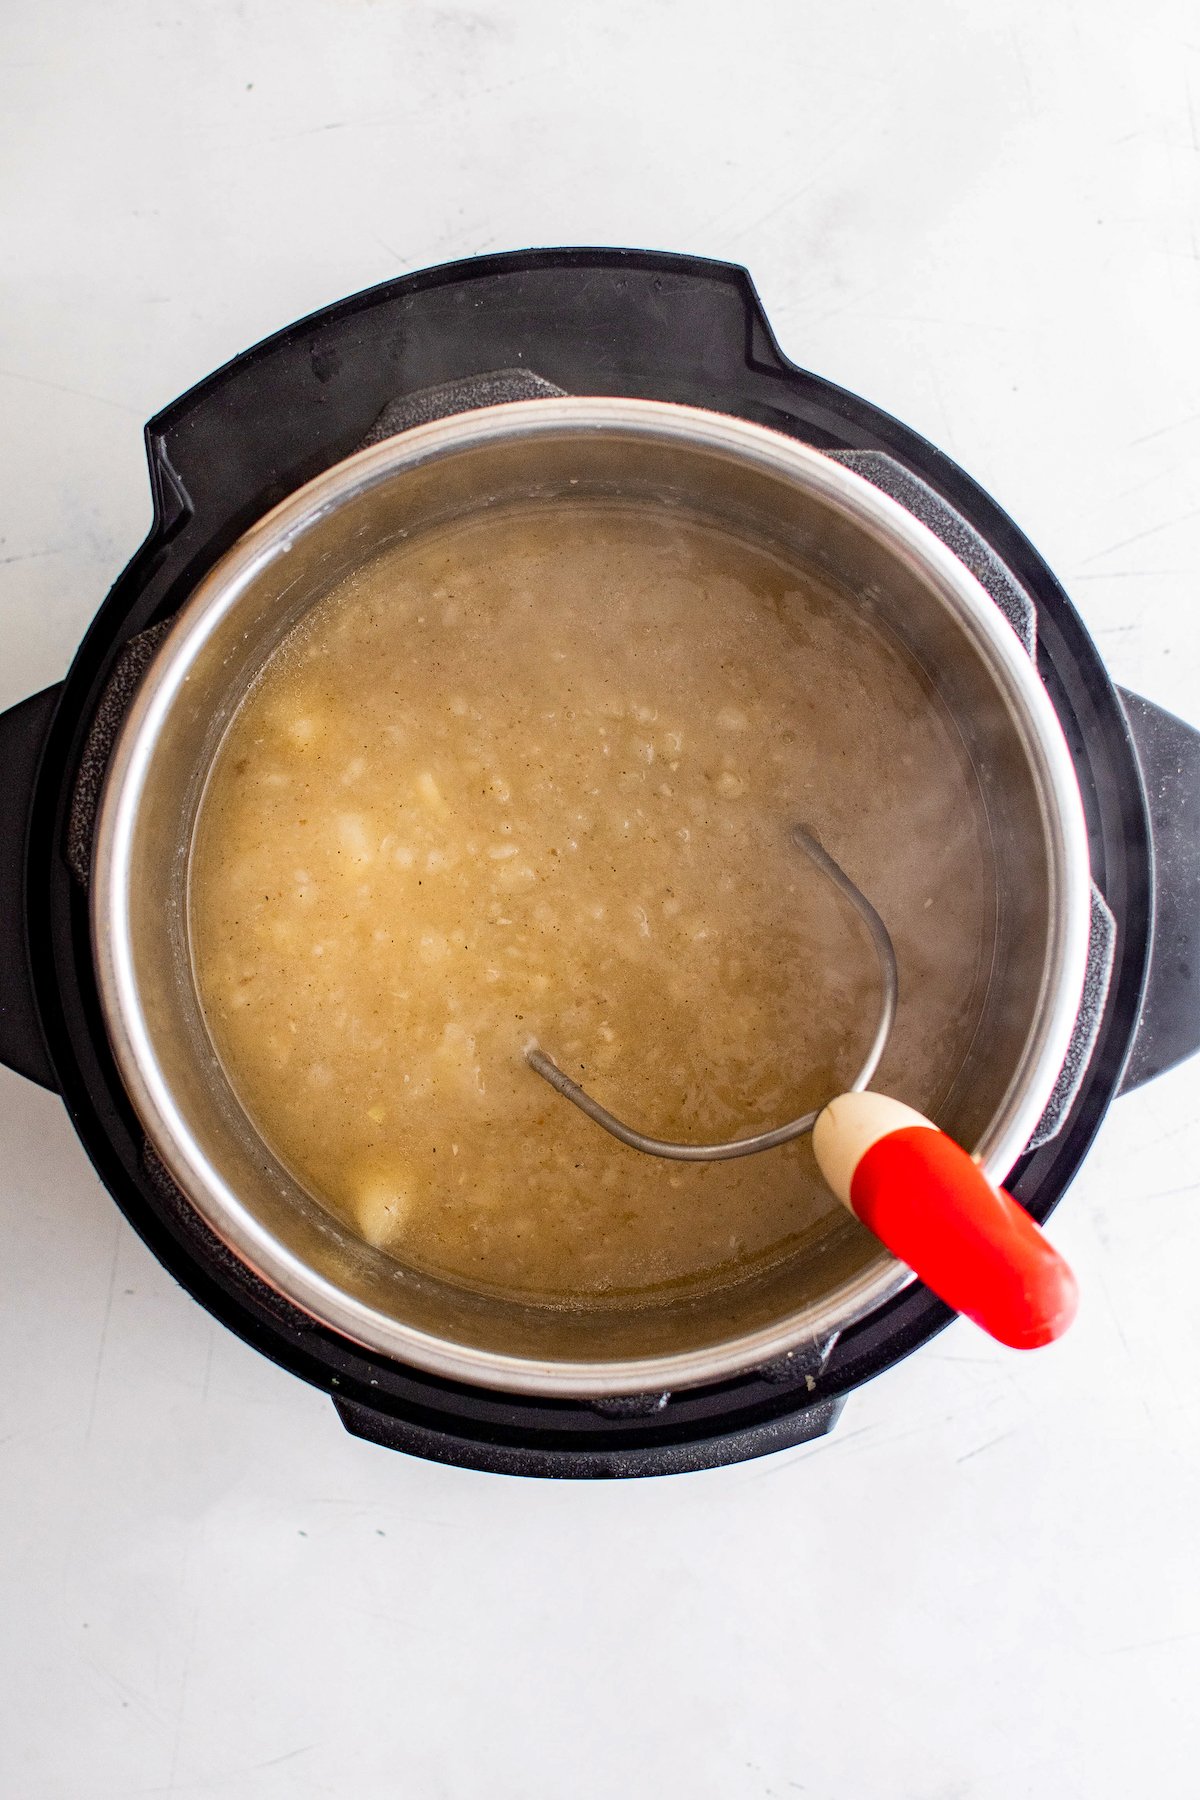 Cooked soup ingredients in an instant pot.